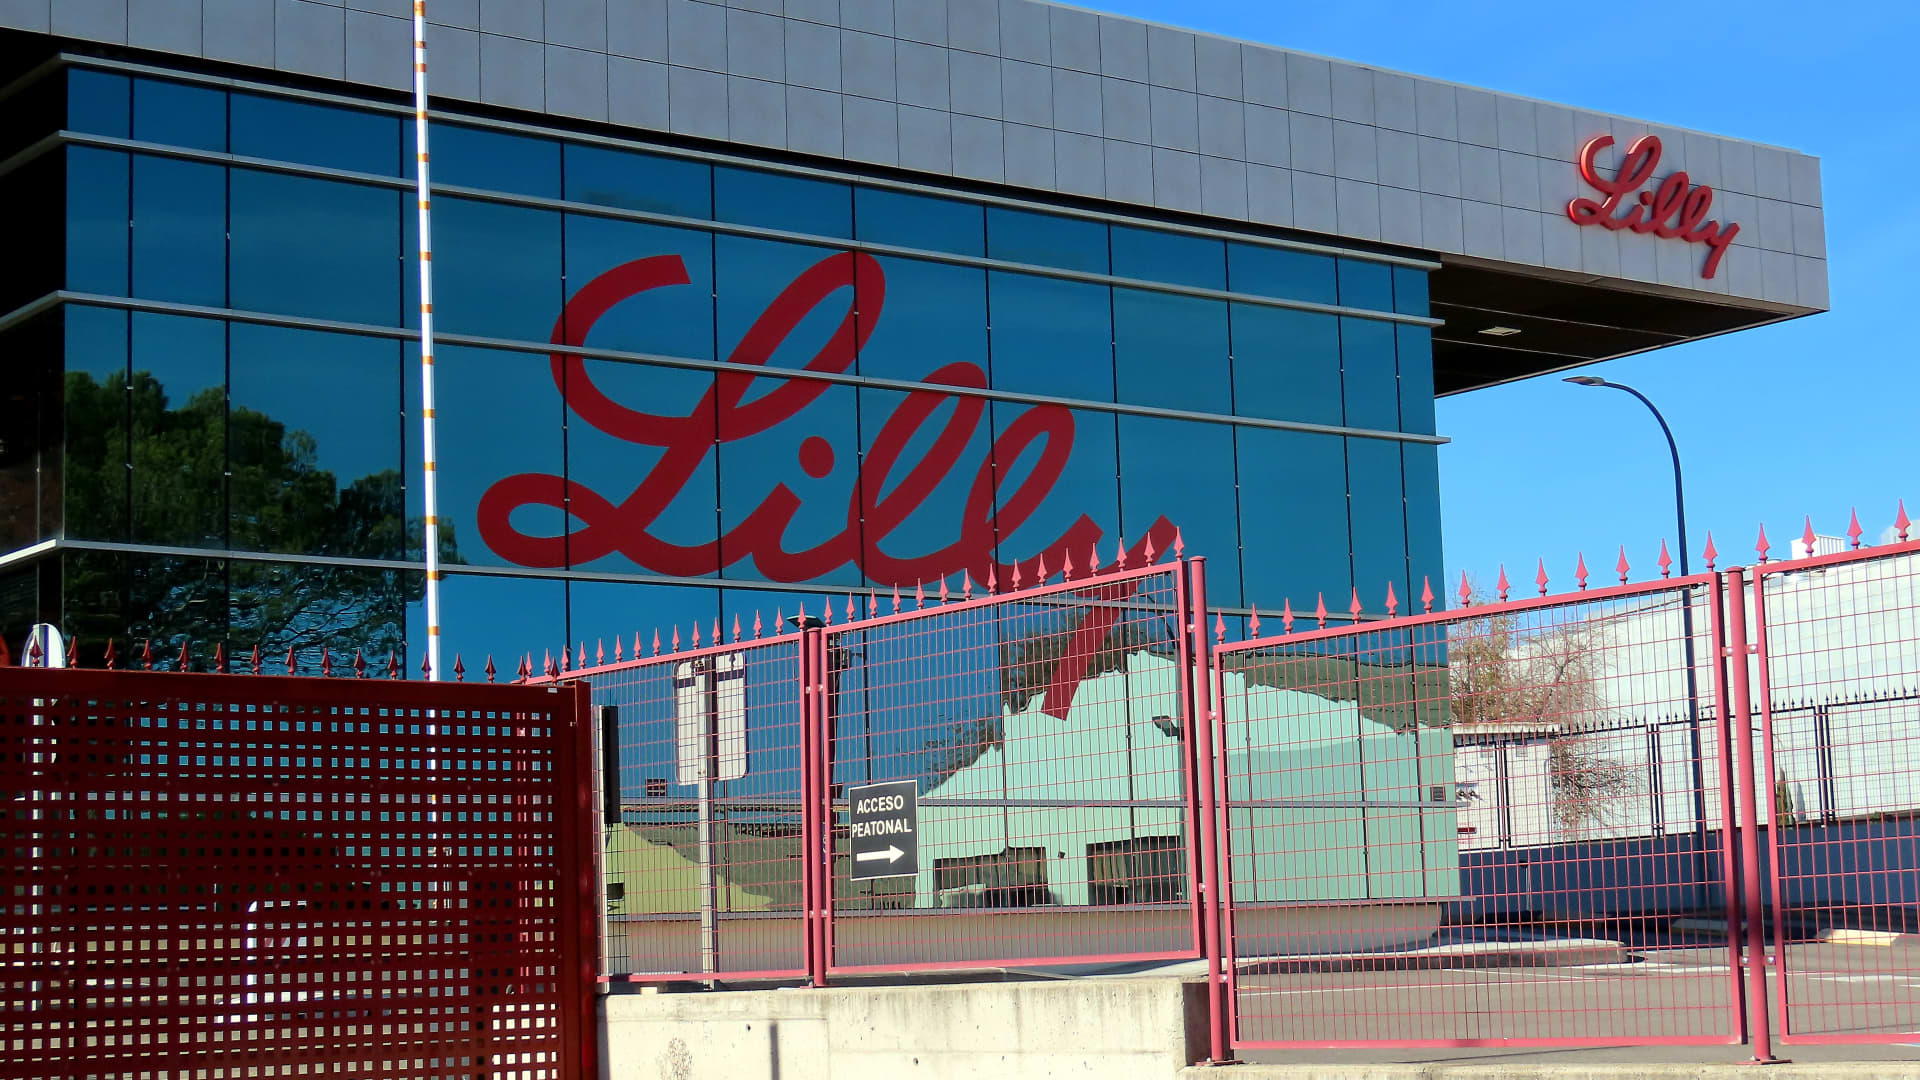 Eli Lilly expects FDA decision on Alzheimer’s treatment donanemab by the end of the year